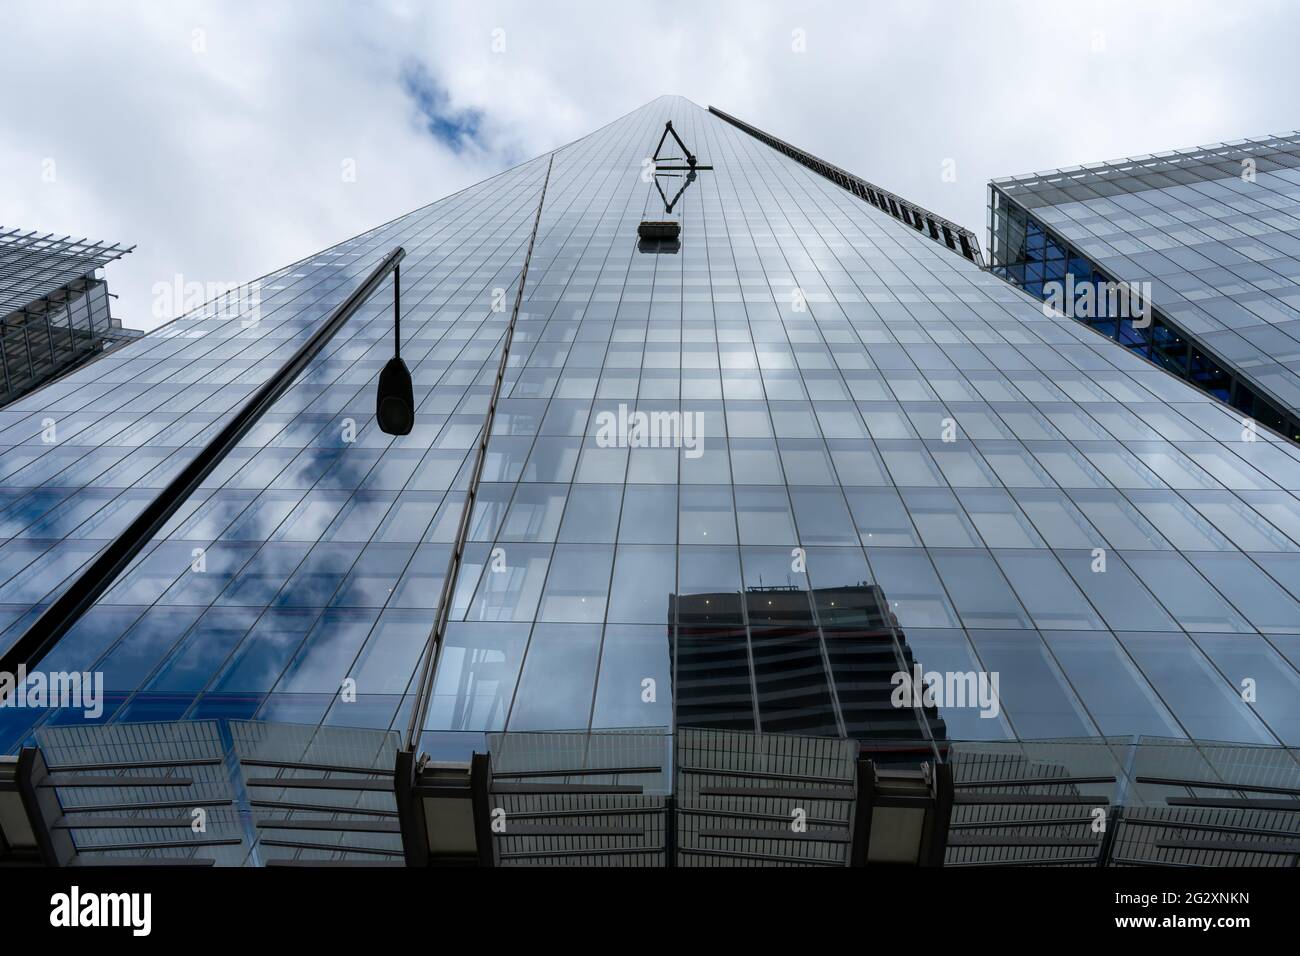 London. The frontage of The Shard. Britain's tallest commercial skyscraper offering luxury offices, hotel, restaurants, bars and fantastic views. Stock Photo